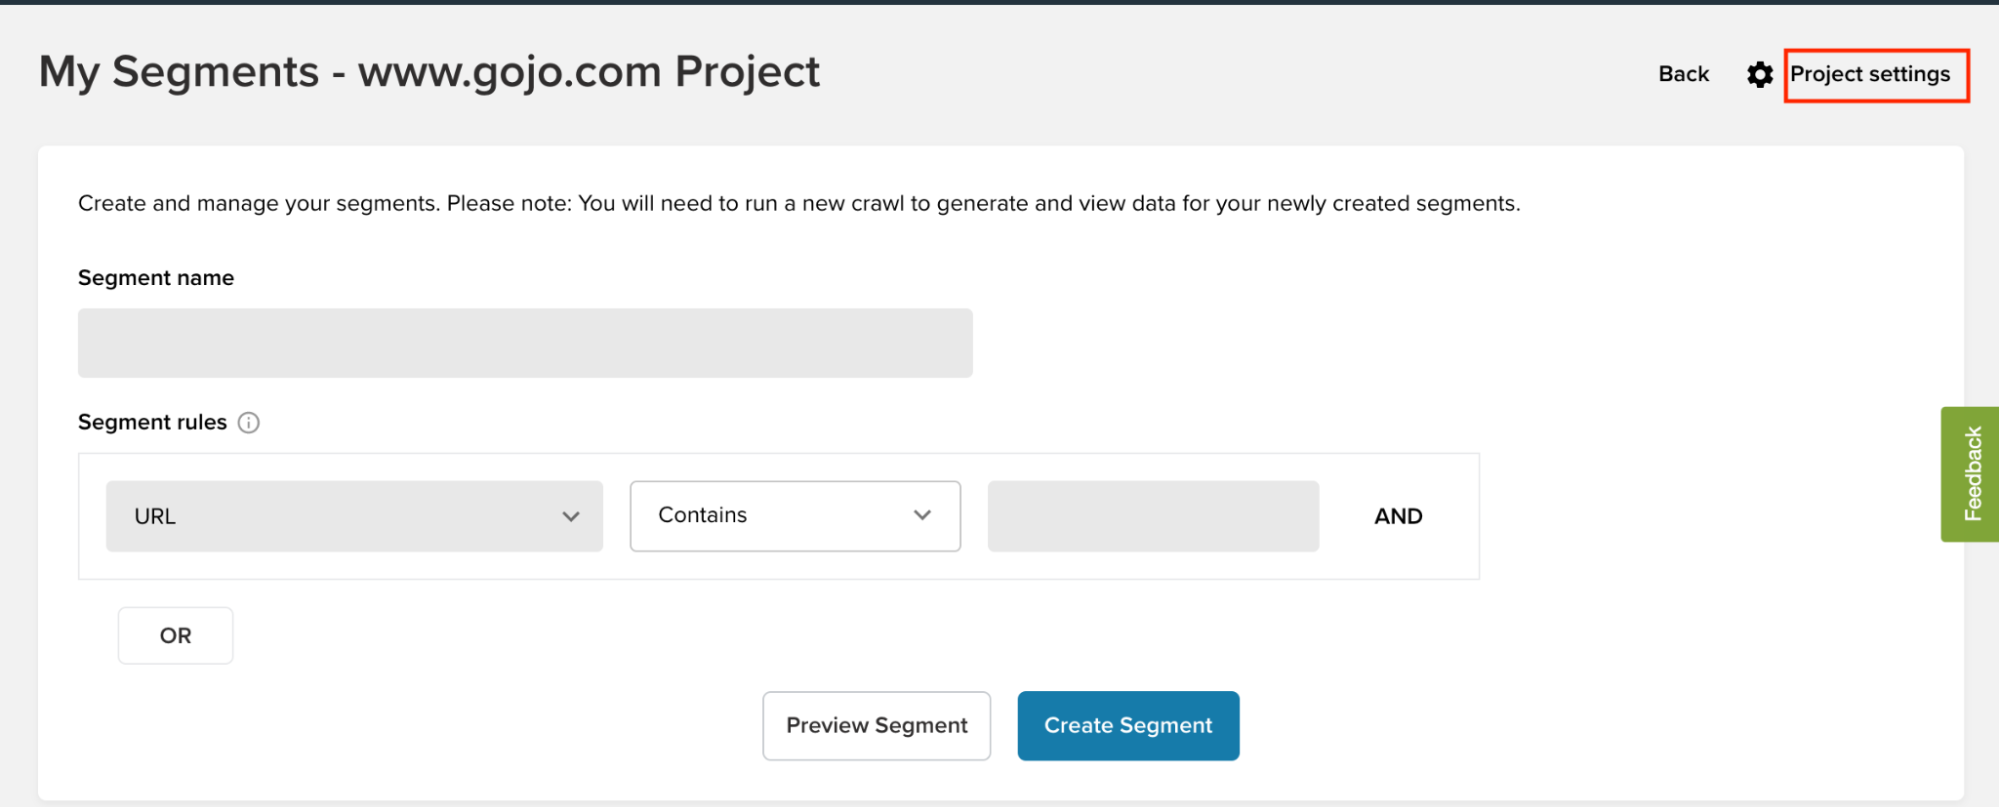 Run a crawl with your new segments added by navigating to Deepcrawl's Project Settings tab